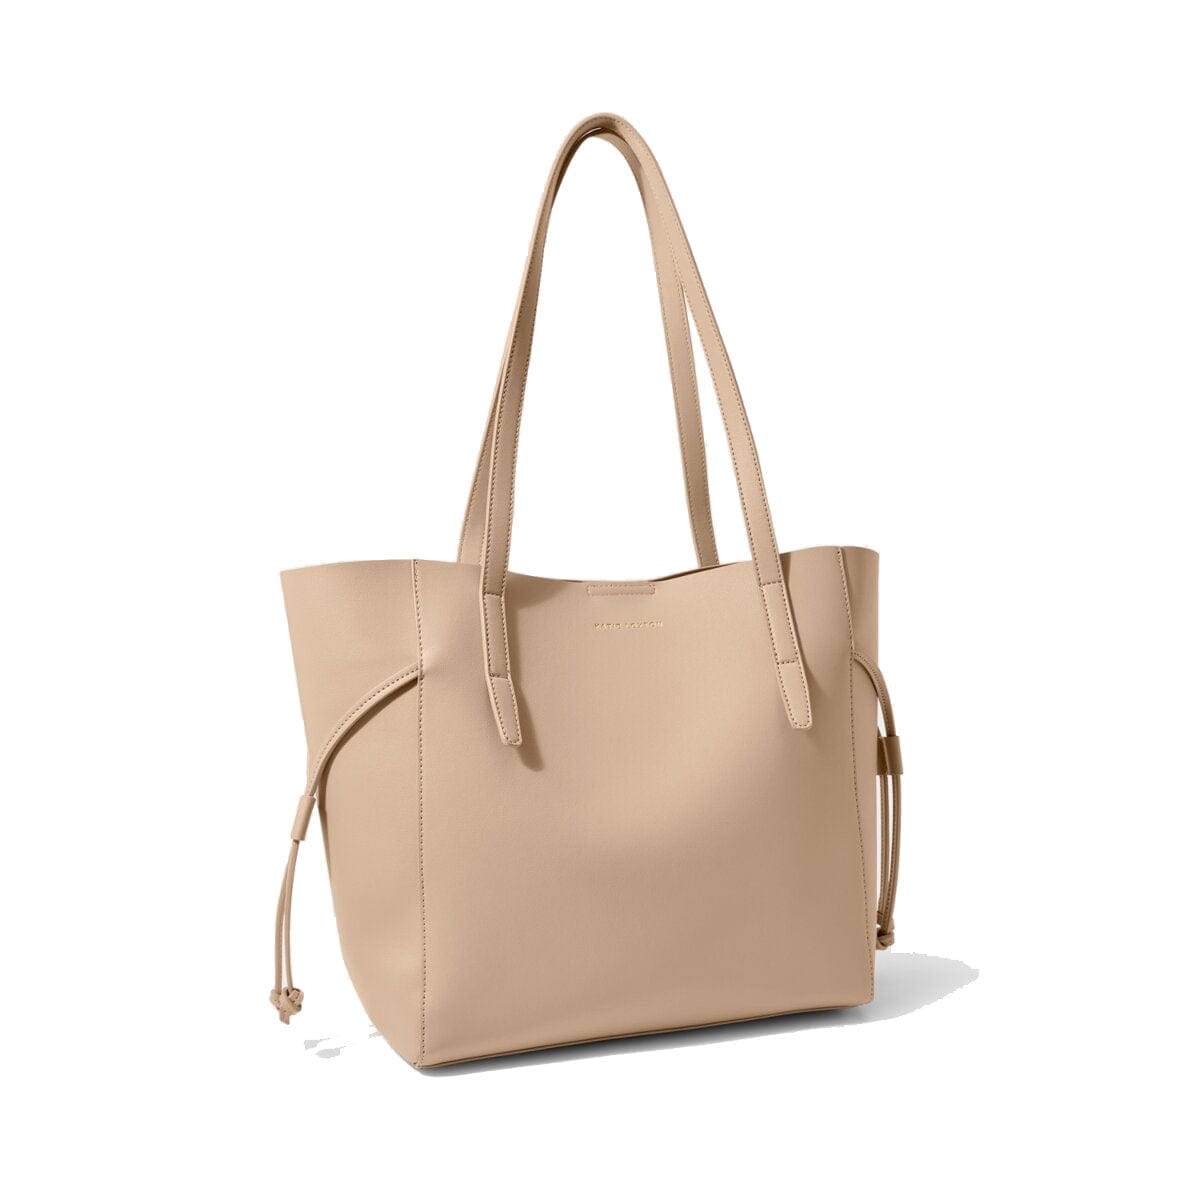 Katie Loxton Tote Bag Light Taupe Katie Loxton Ashley Tote Bag - Off White / Dusty Pink / Soft Sage / Light Taupe